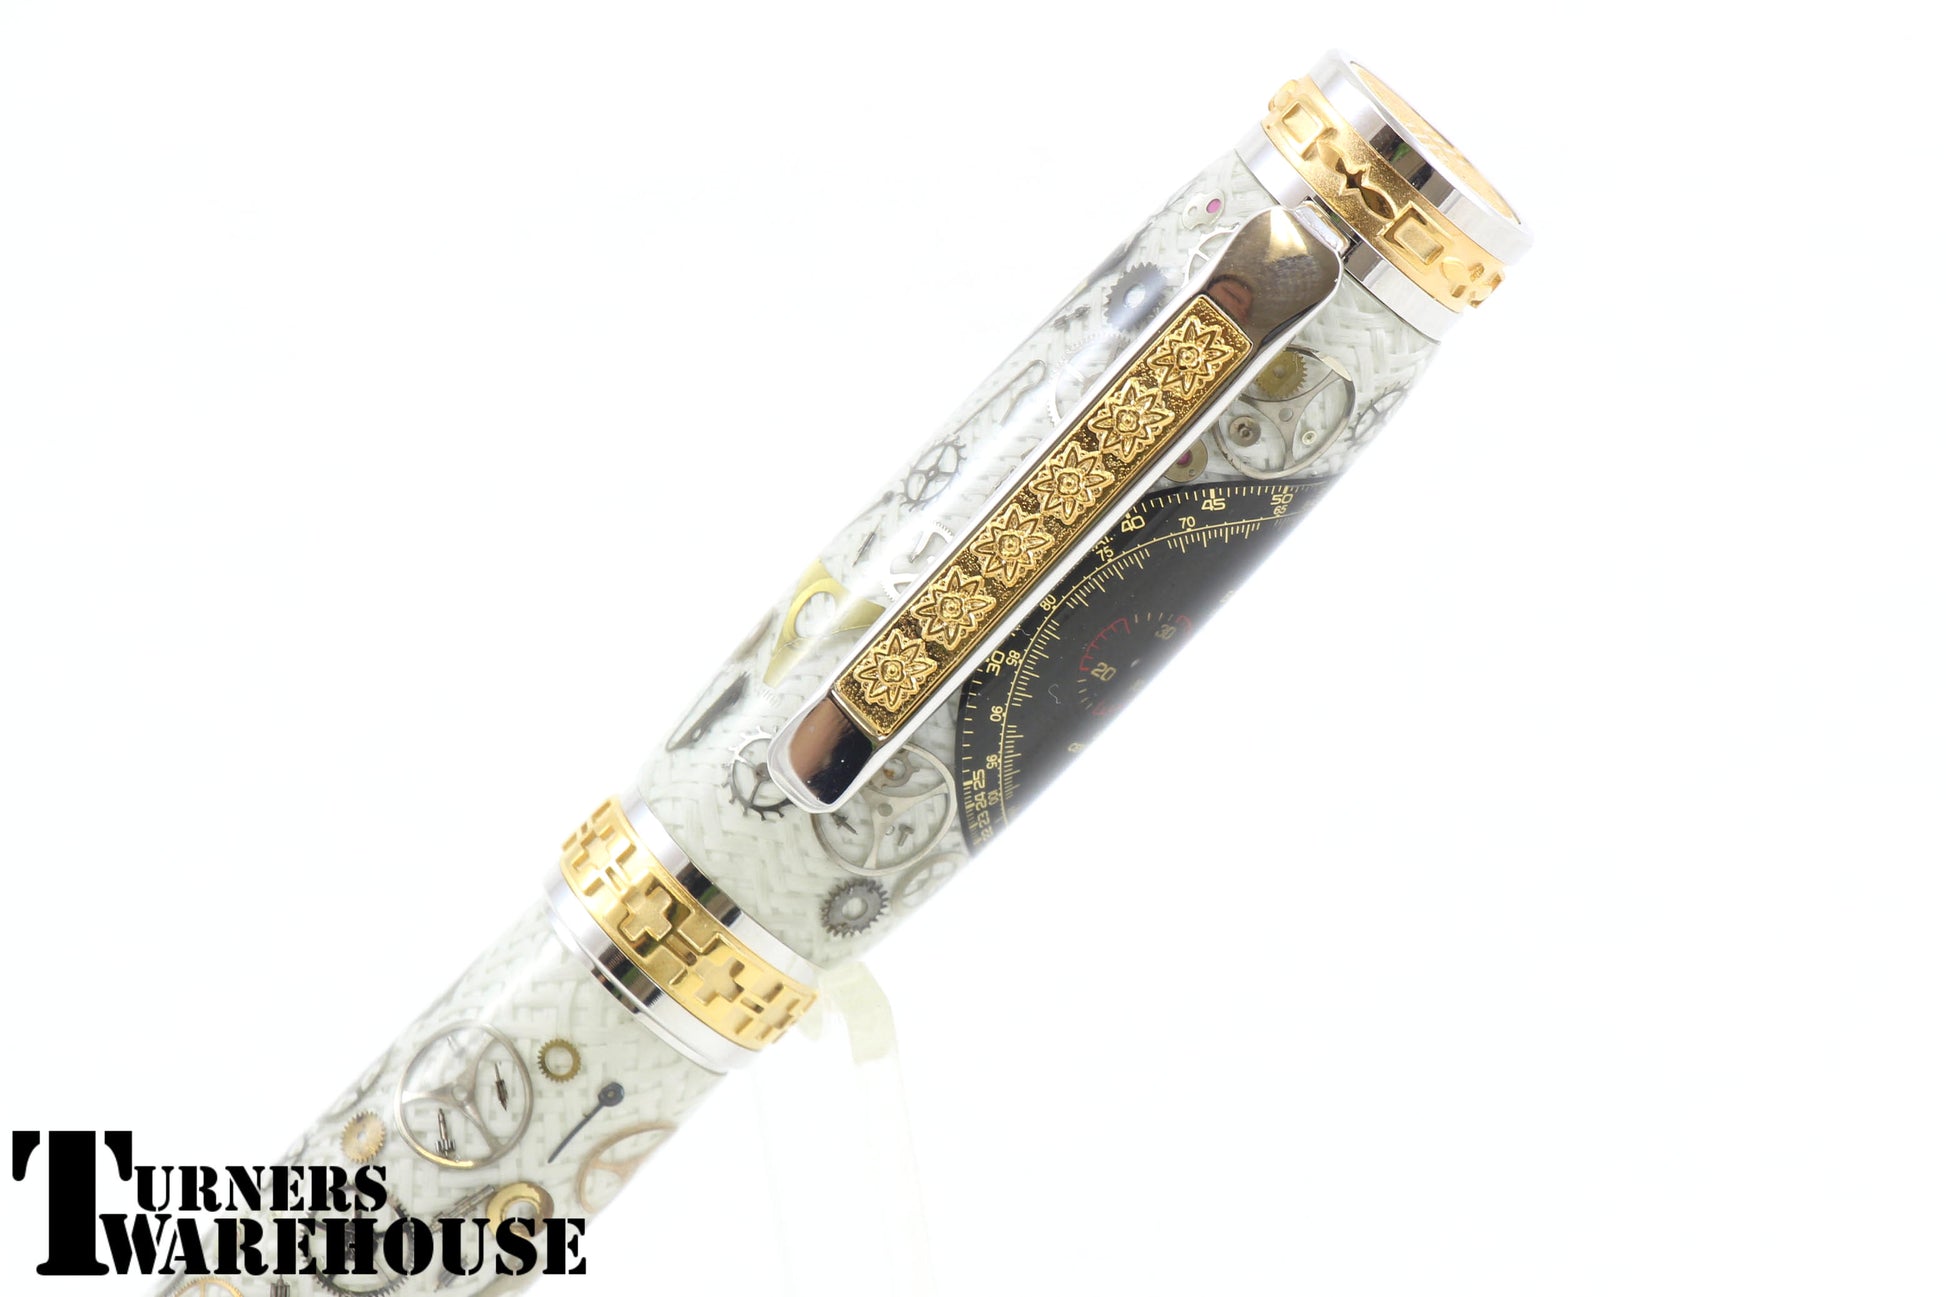 Emperor Fountain Pen in Rhodium and Gold with Vintage Watchpart body Closeup on Clip